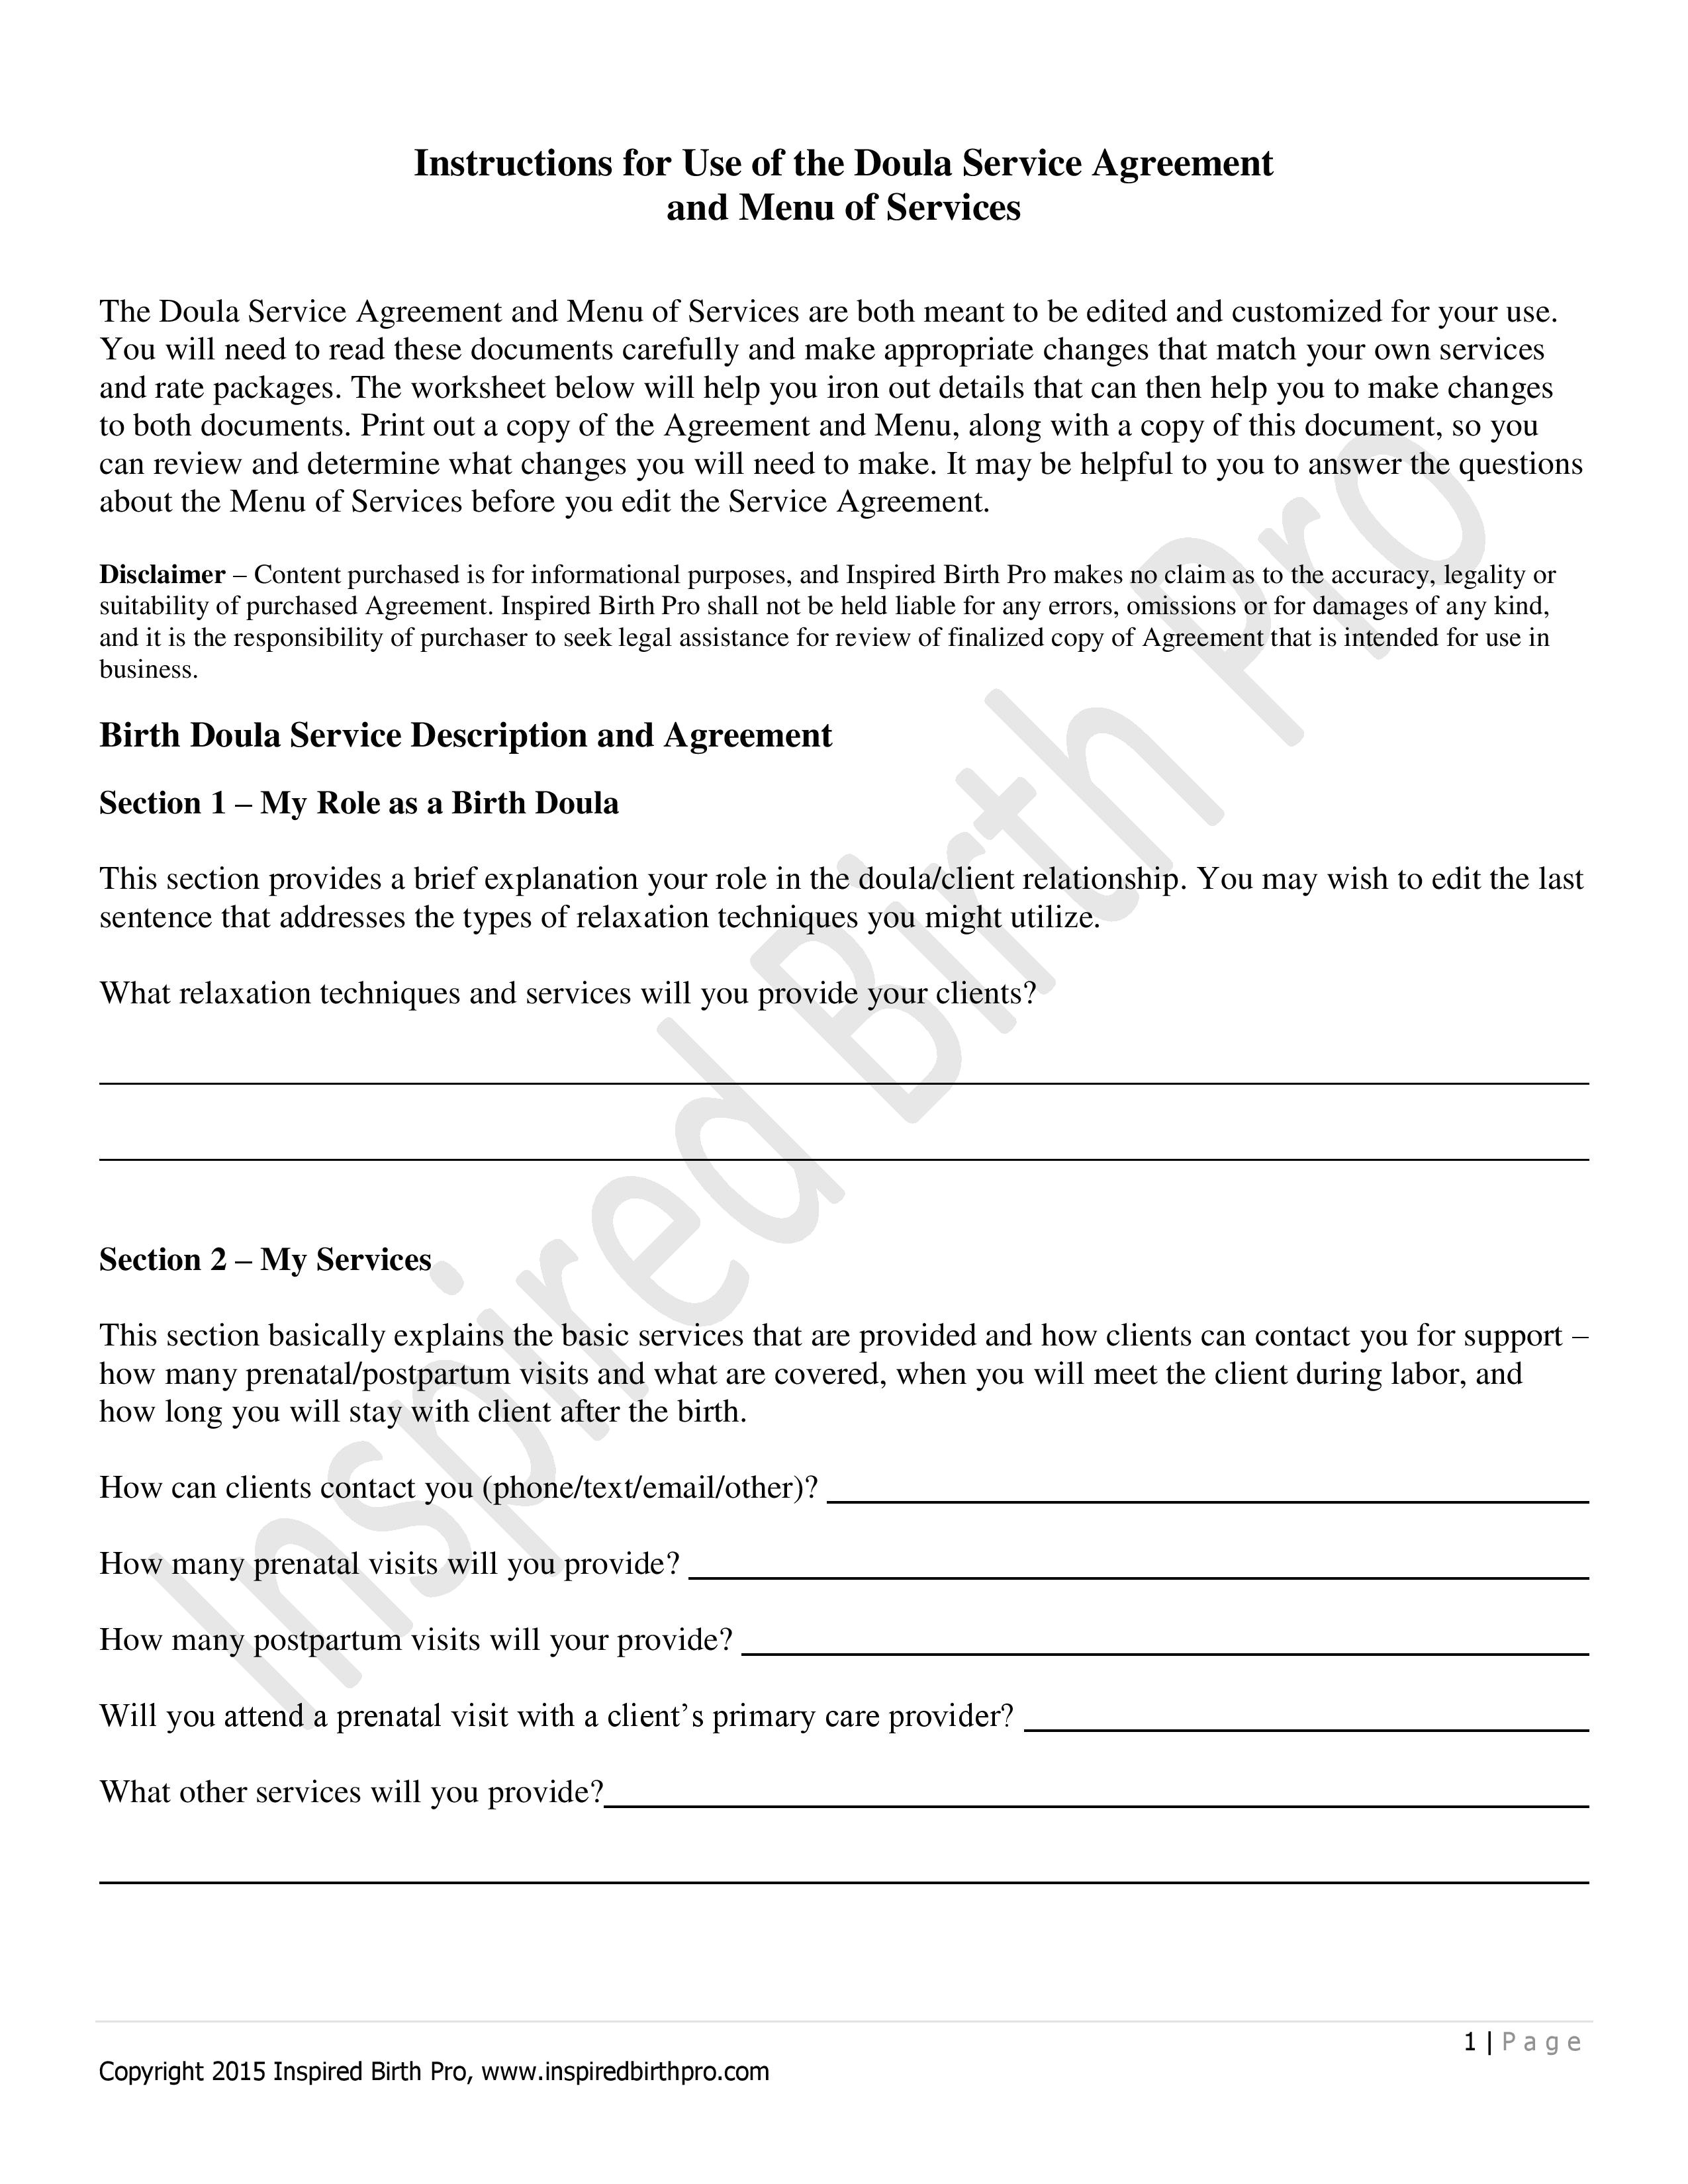 birth doula contract template